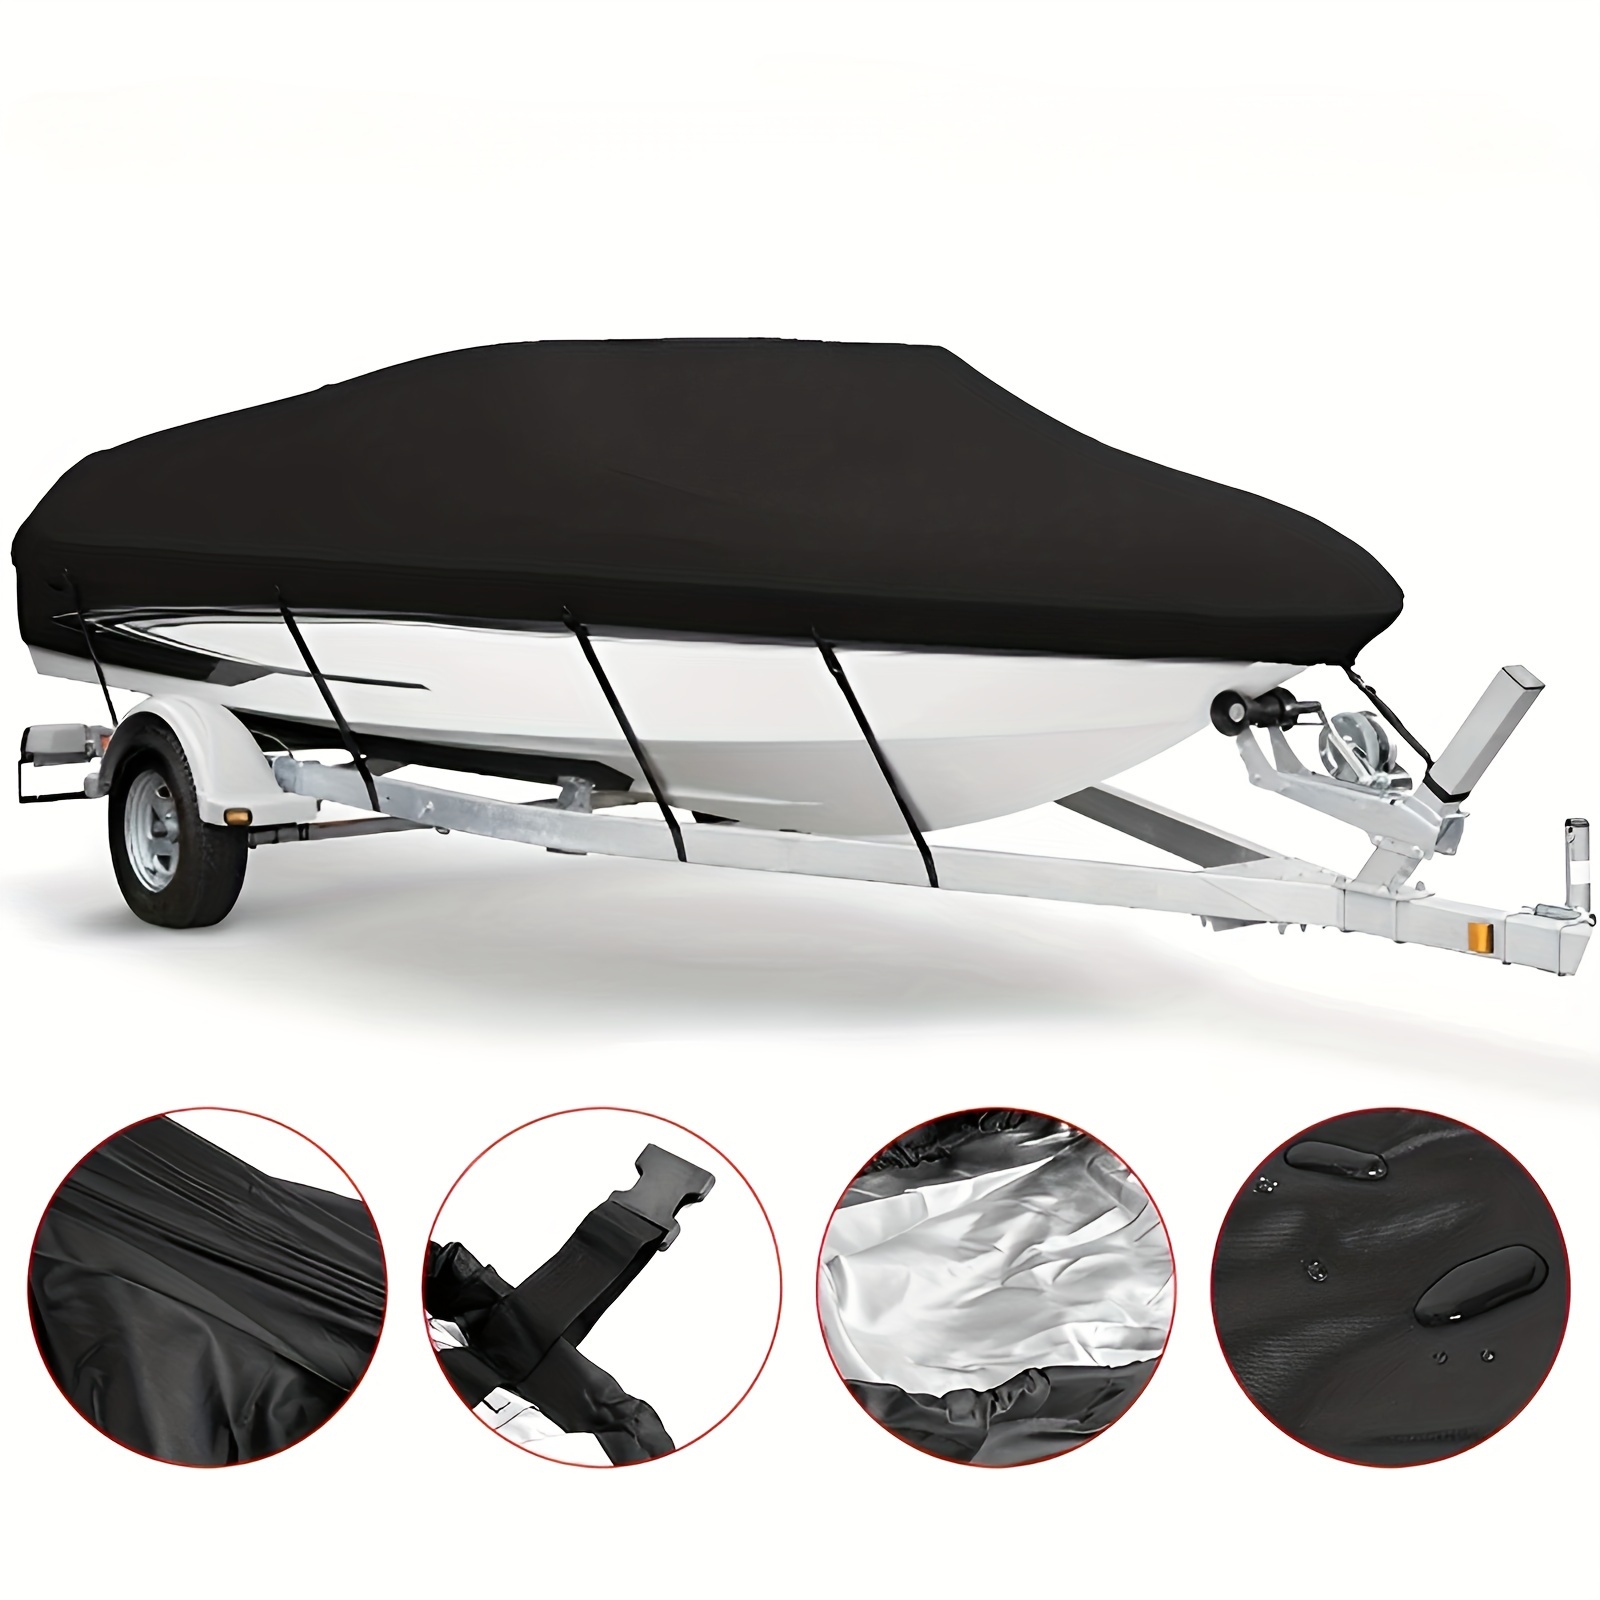 Top Cover Waterproof Inflatable Fishing Boat Tent Kayak Awning Luxury Boat  Yacht Hardware Canopy Roof Sunshade Awning